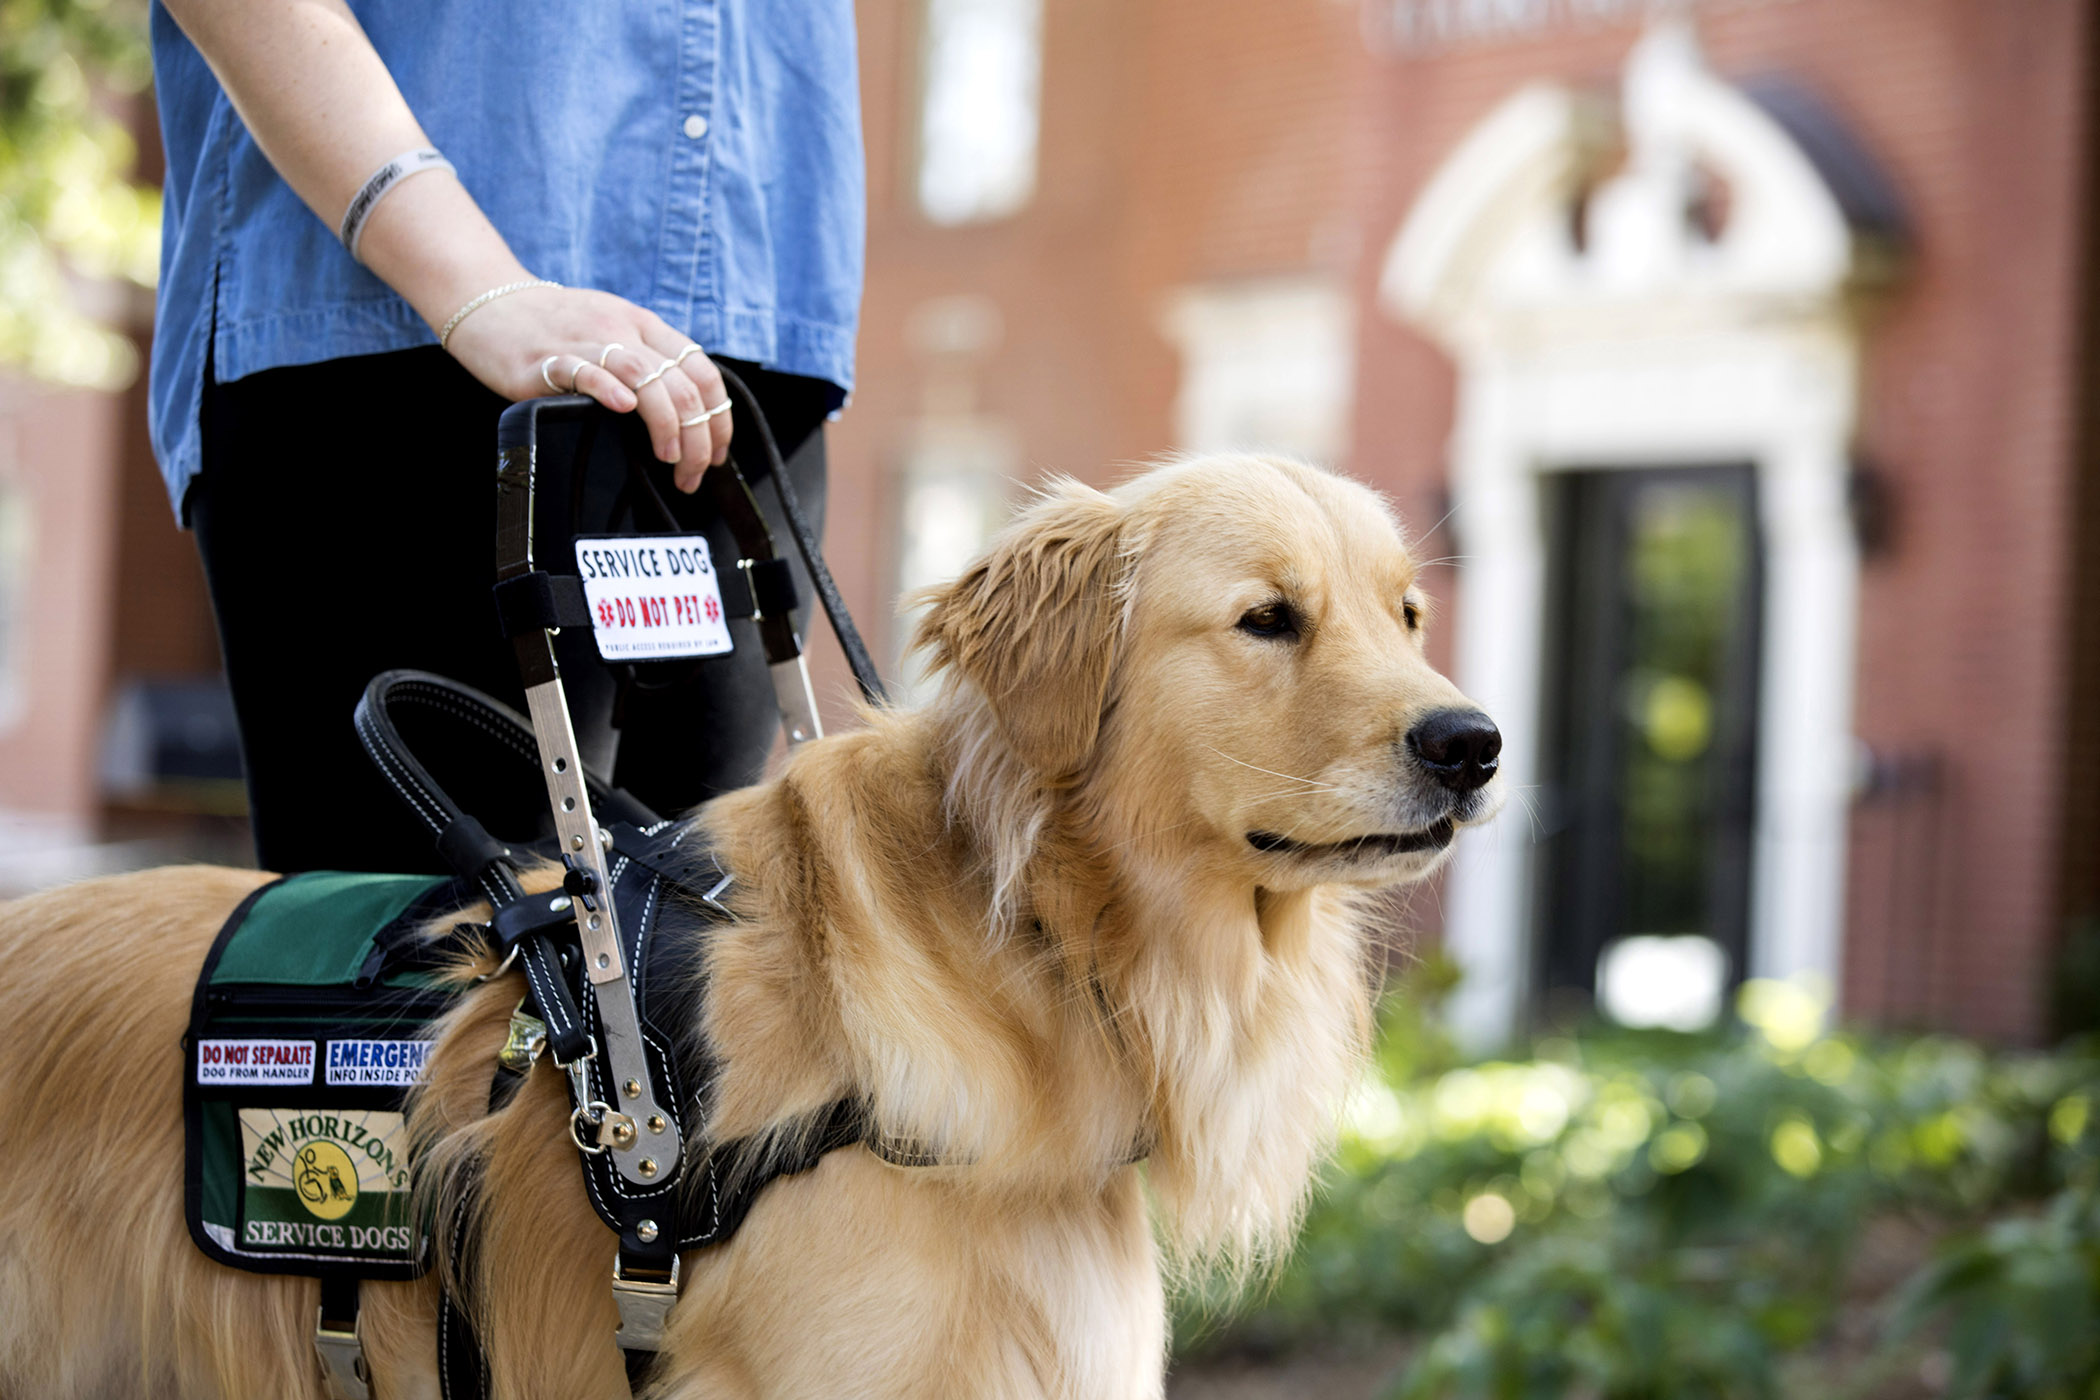 Can You Ask To See A Service Dogs Id